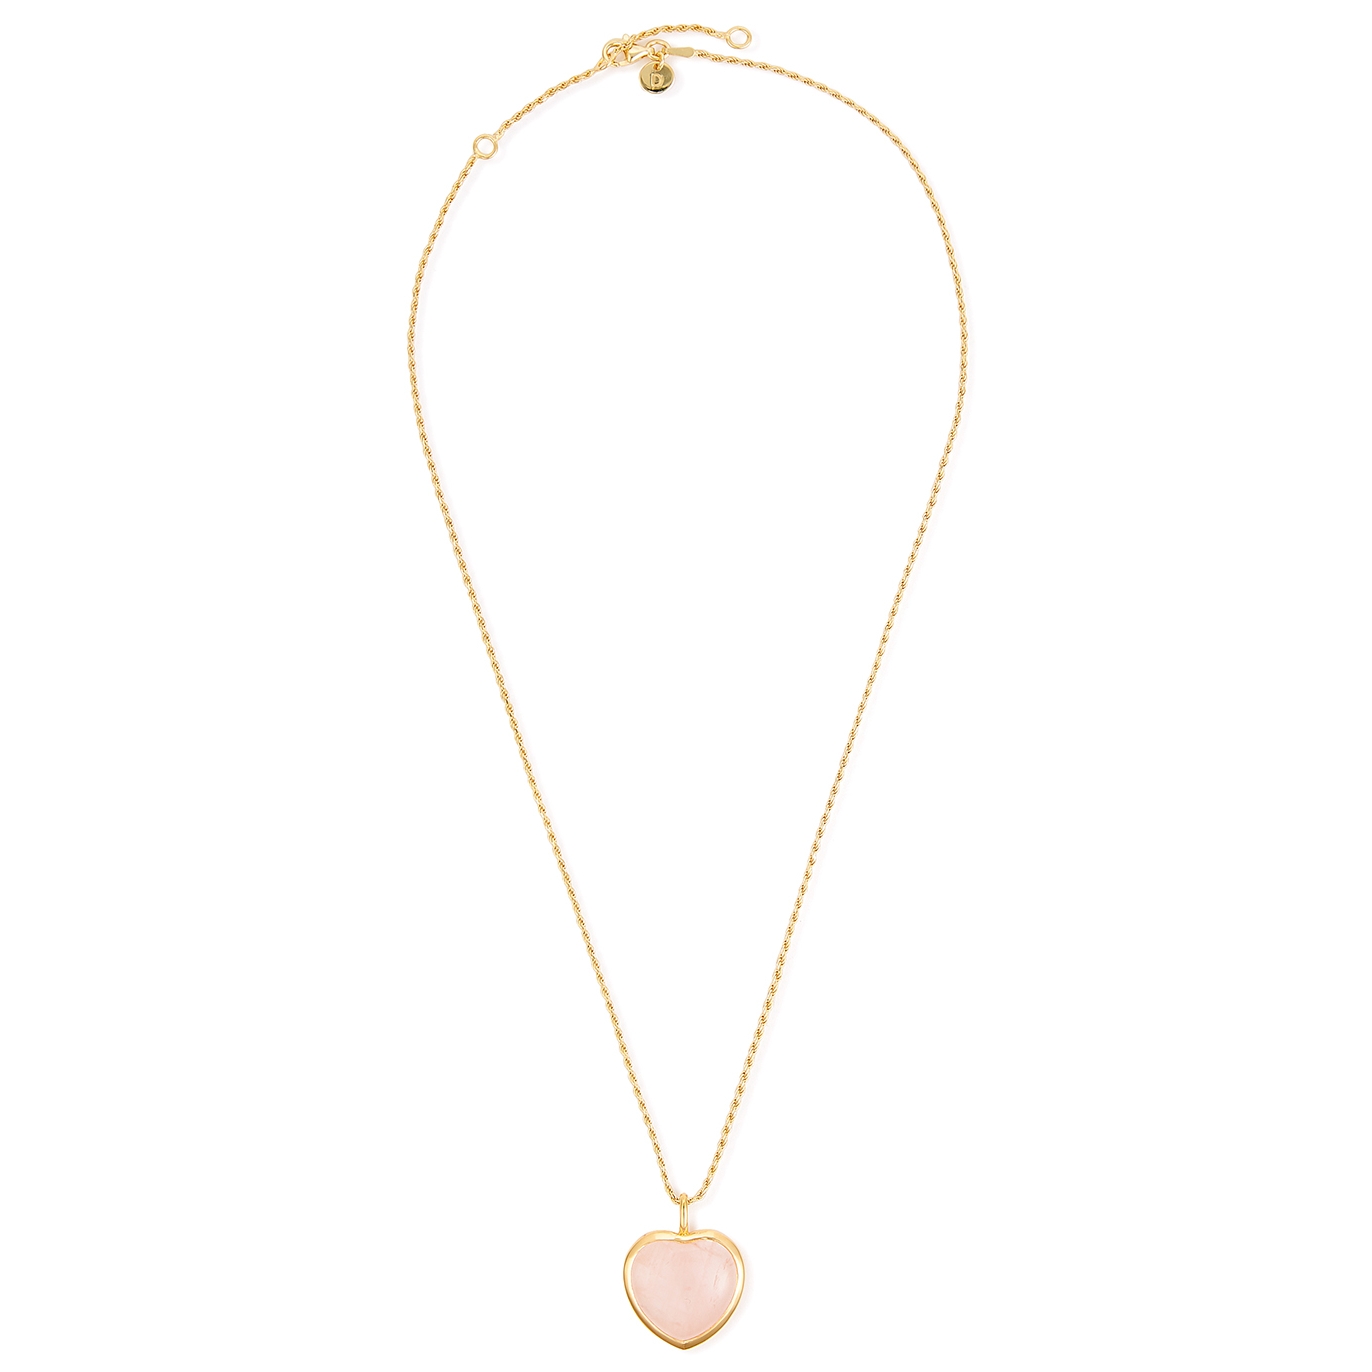 Daisy London Beloved Rose Quartz Heart 18kt Gold-plated Necklace - One Size